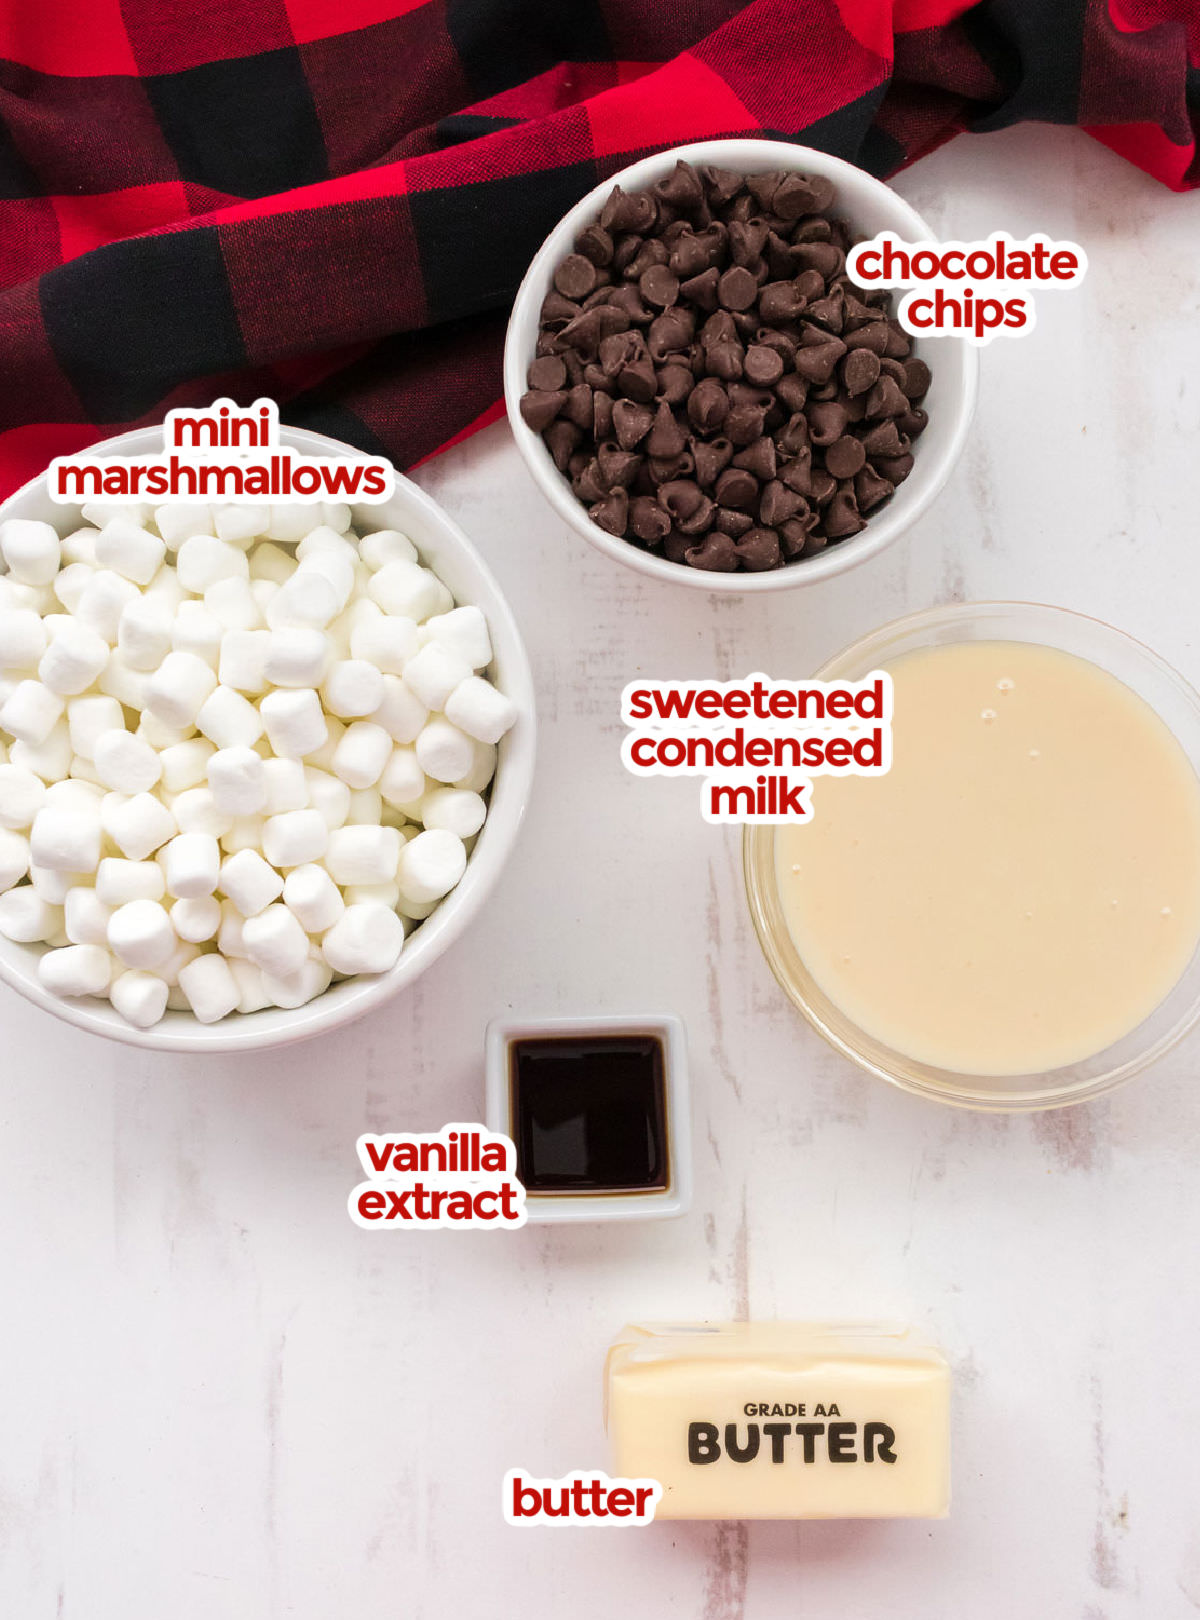 All the ingredients you will need to make Easy Chocolate Fudge including chocolate chips, mini marshmallows, sweetened condensed milk and vanilla extract.